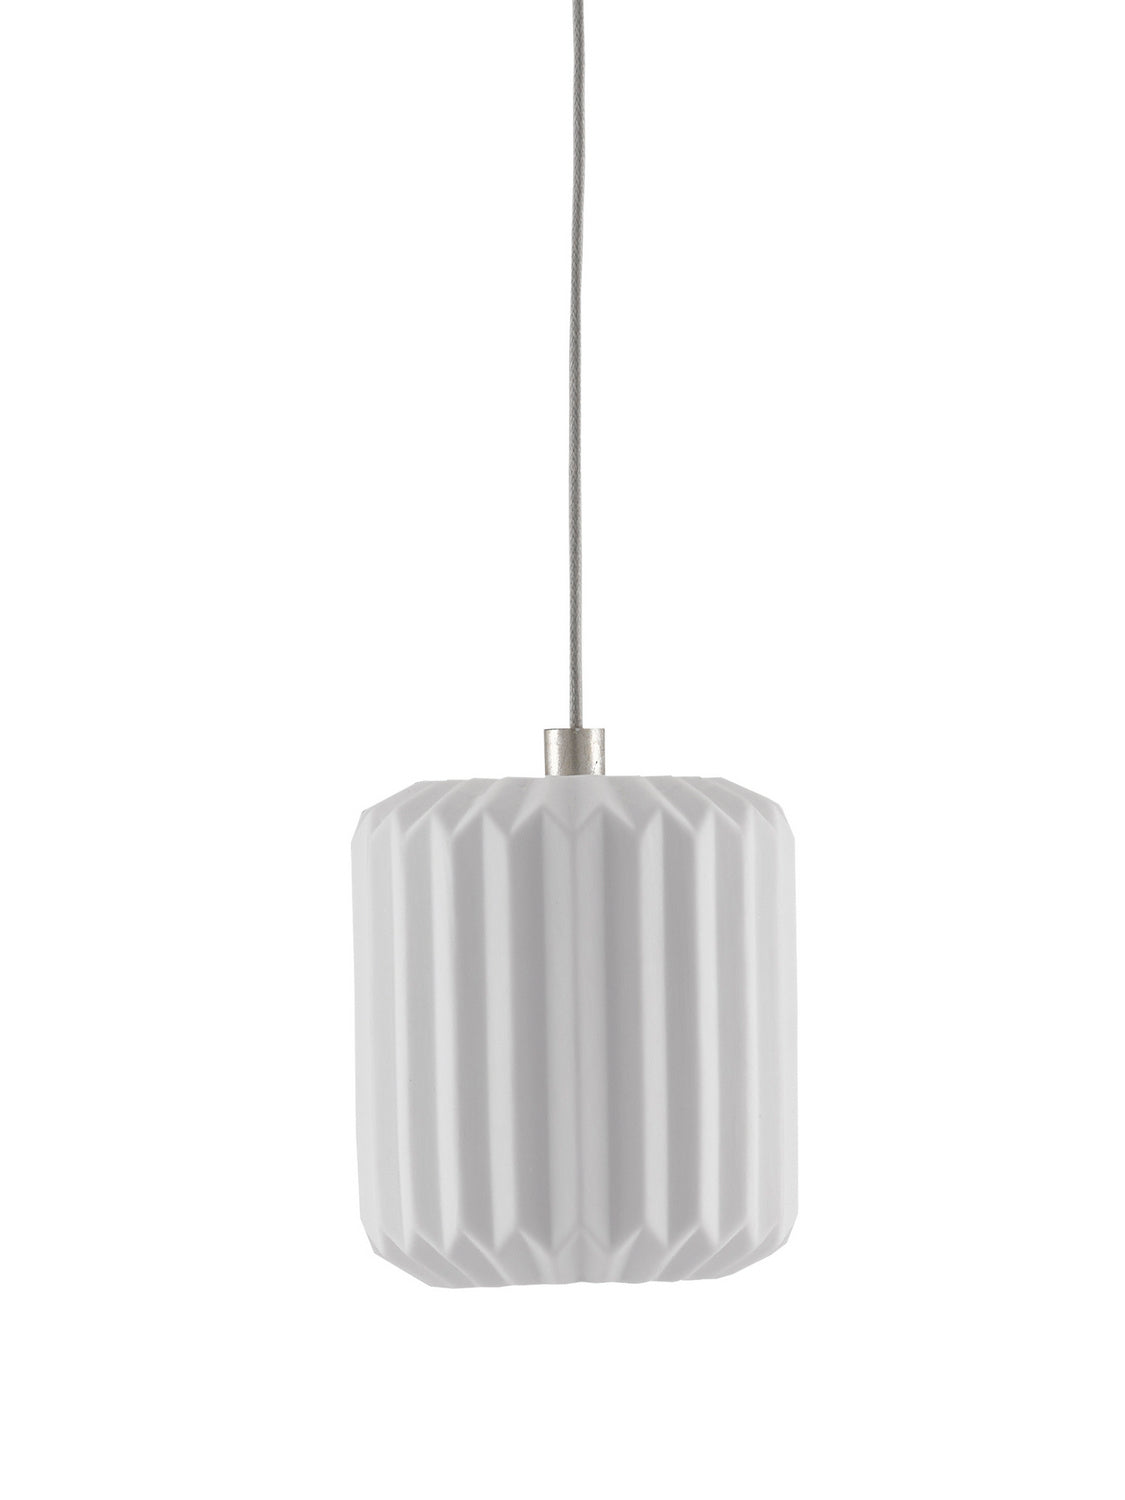 One Light Pendant from the Dove collection in Painted Silver/White finish